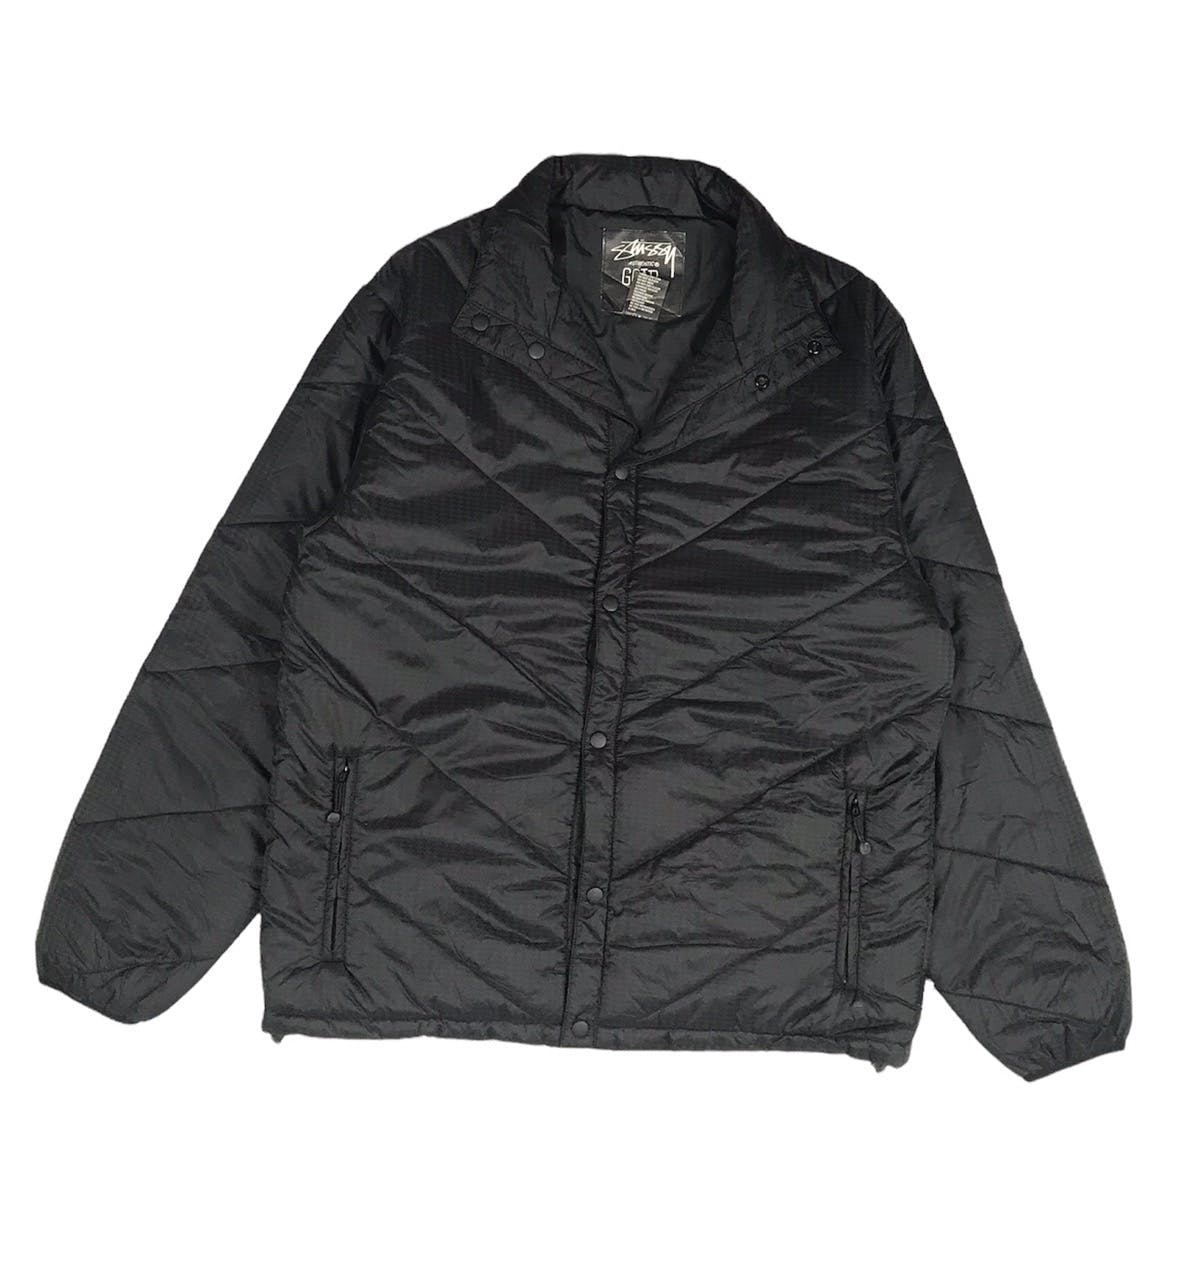 Stussy Authentic Gear puffer jacket